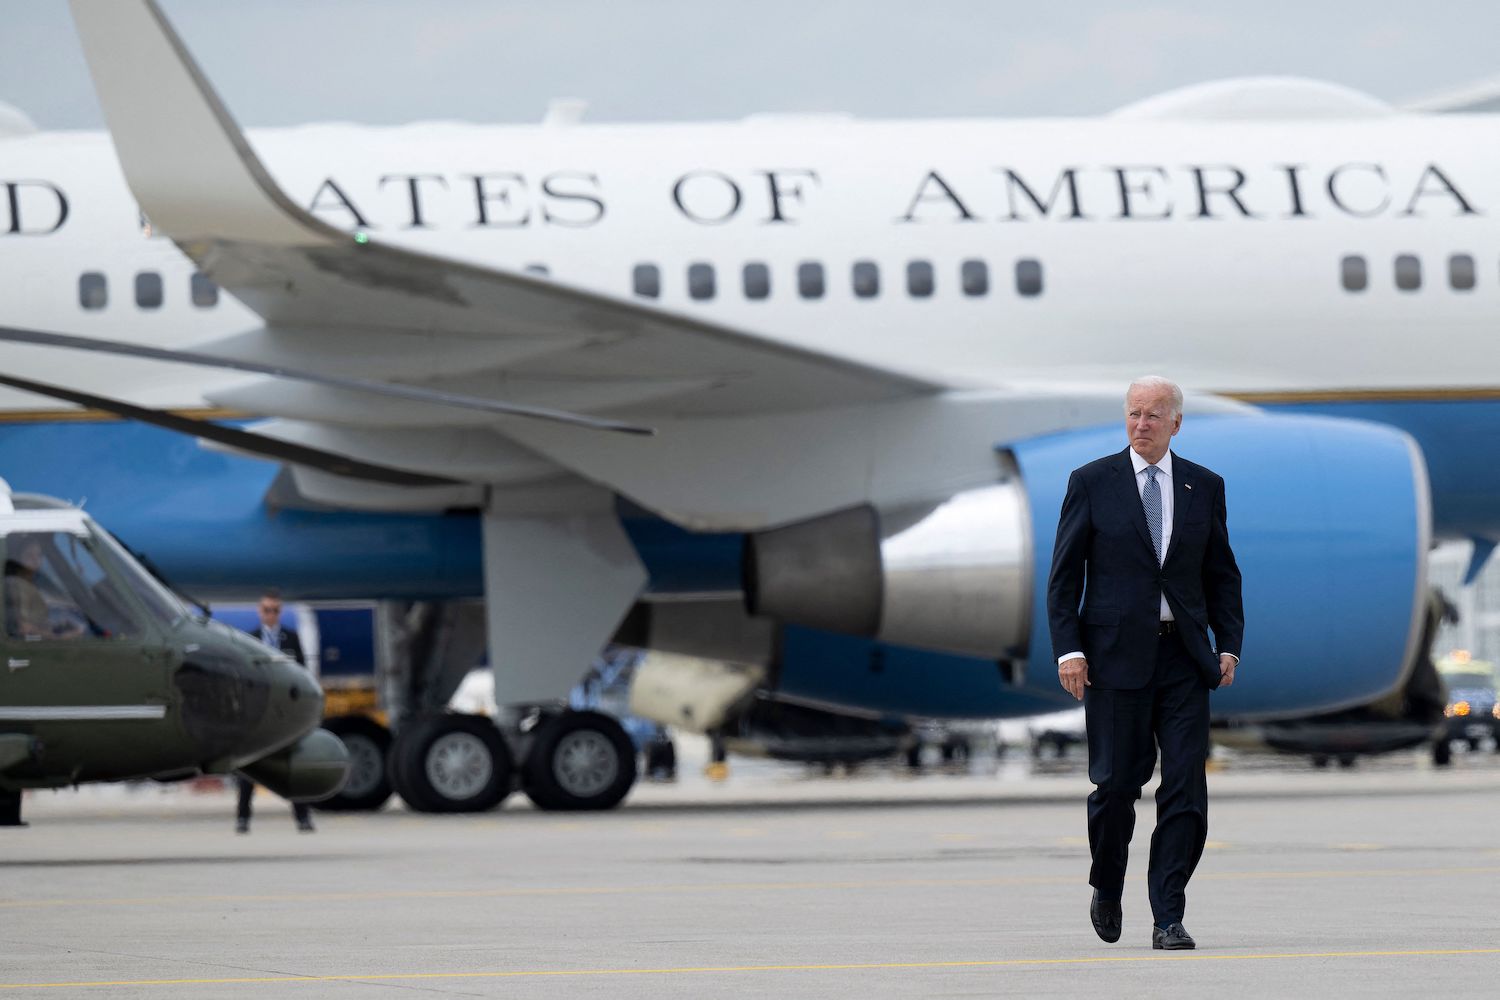 US President Joe Biden walks to Air Force One at Munich Airport June 28, 2022, in Munich, southern Germany, after attending  the G7 Summit hosted by the German Chancellor. (Photo by Brendan Smialowski / AFP) (Photo by BRENDAN SMIALOWSKI/AFP via Getty Images)